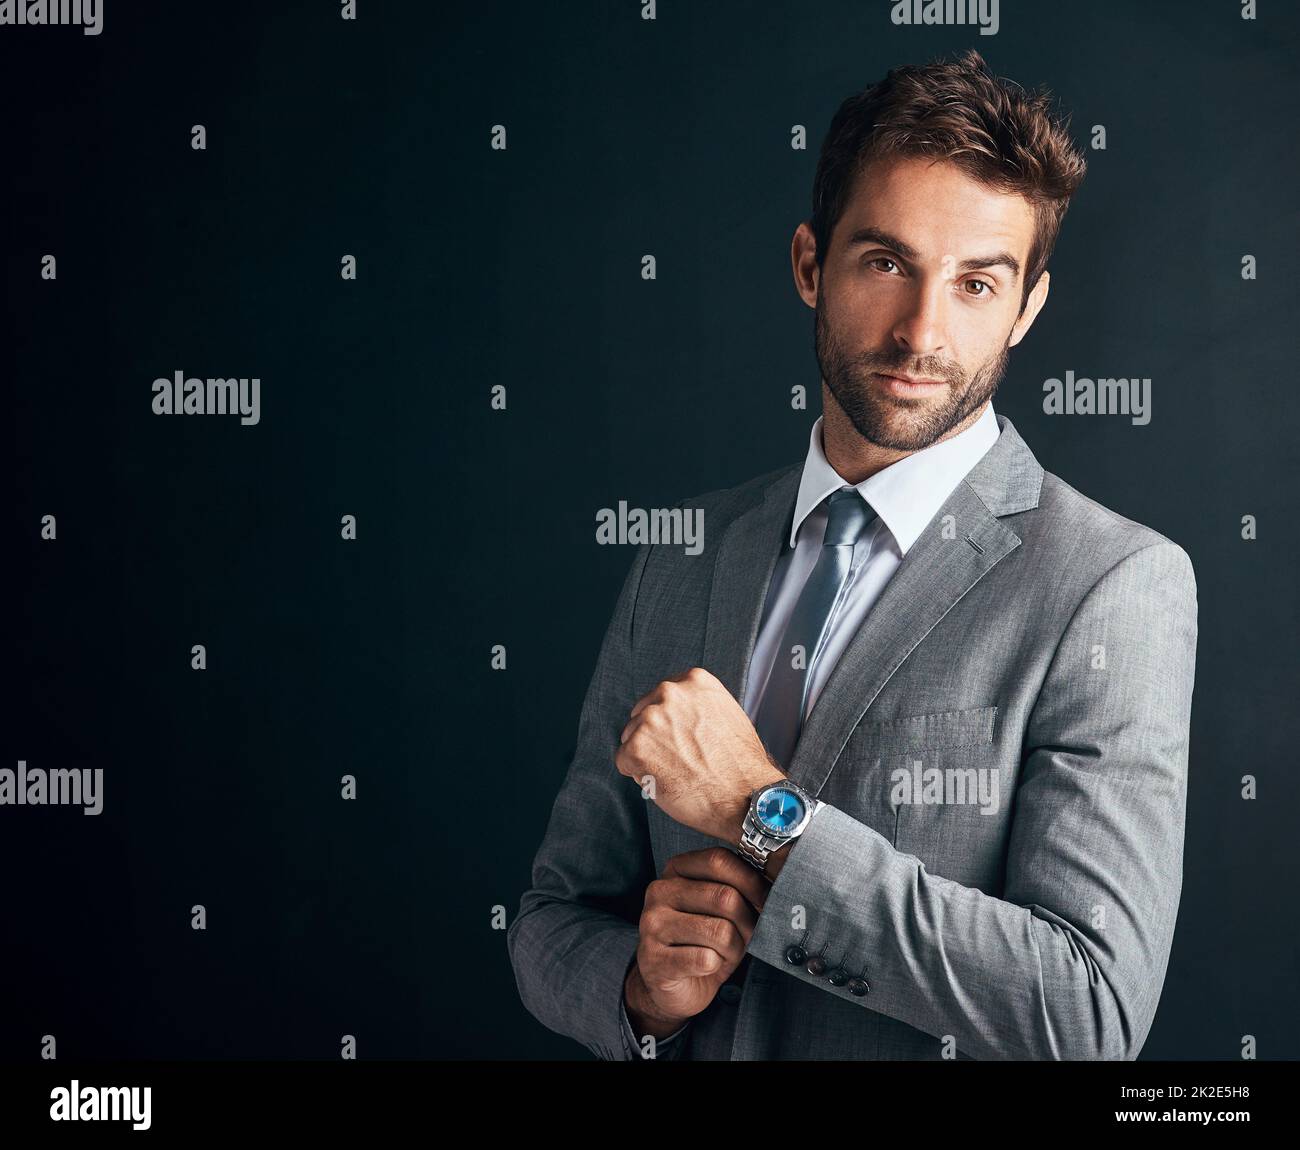 Dress like you mean business. Studio shot of a confident and stylishly dressed young businessman against a black background. Stock Photo